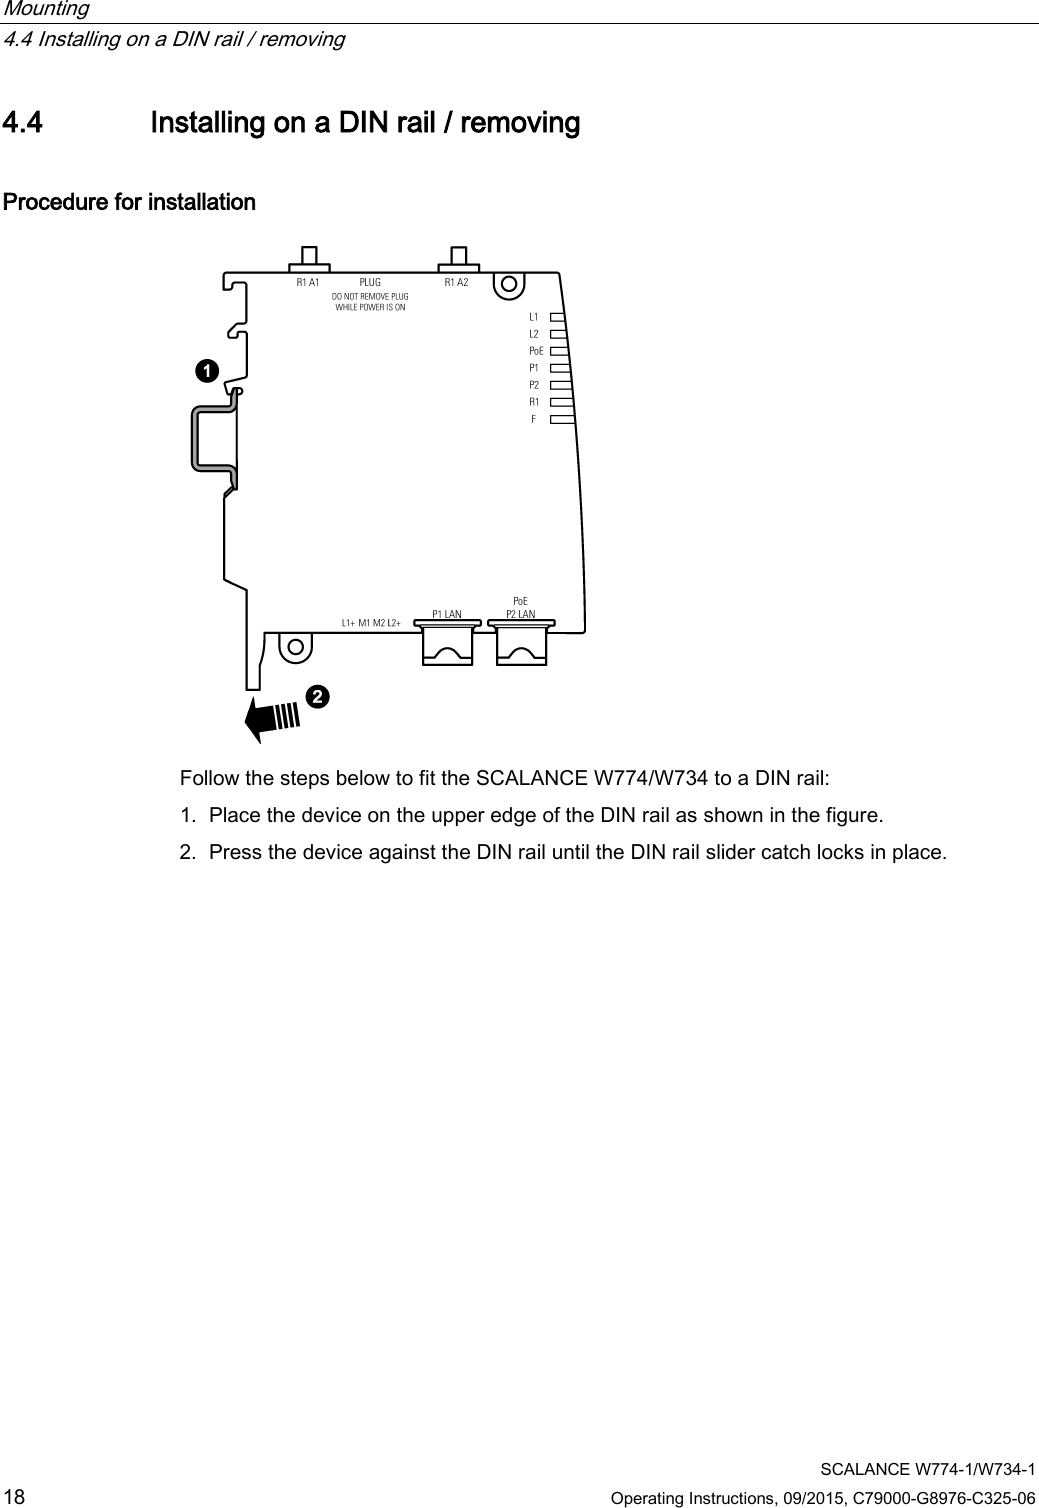 Mounting   4.4 Installing on a DIN rail / removing  SCALANCE W774-1/W734-1 18 Operating Instructions, 09/2015, C79000-G8976-C325-06 4.4 Installing on a DIN rail / removing Procedure for installation  Follow the steps below to fit the SCALANCE W774/W734 to a DIN rail: 1. Place the device on the upper edge of the DIN rail as shown in the figure. 2. Press the device against the DIN rail until the DIN rail slider catch locks in place. 